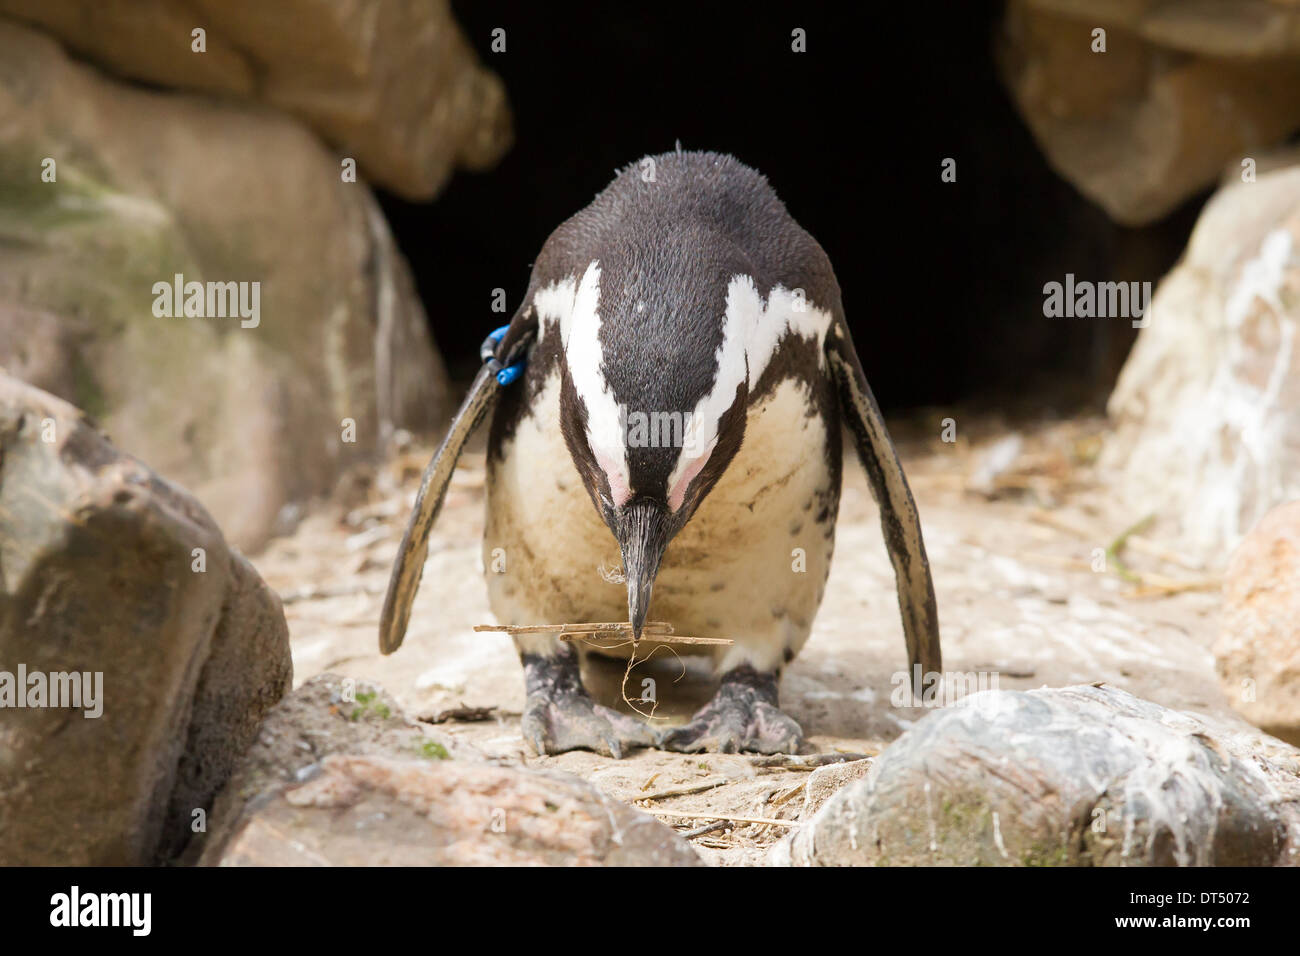 African penguin collecting nesting material in a zoo Stock Photo